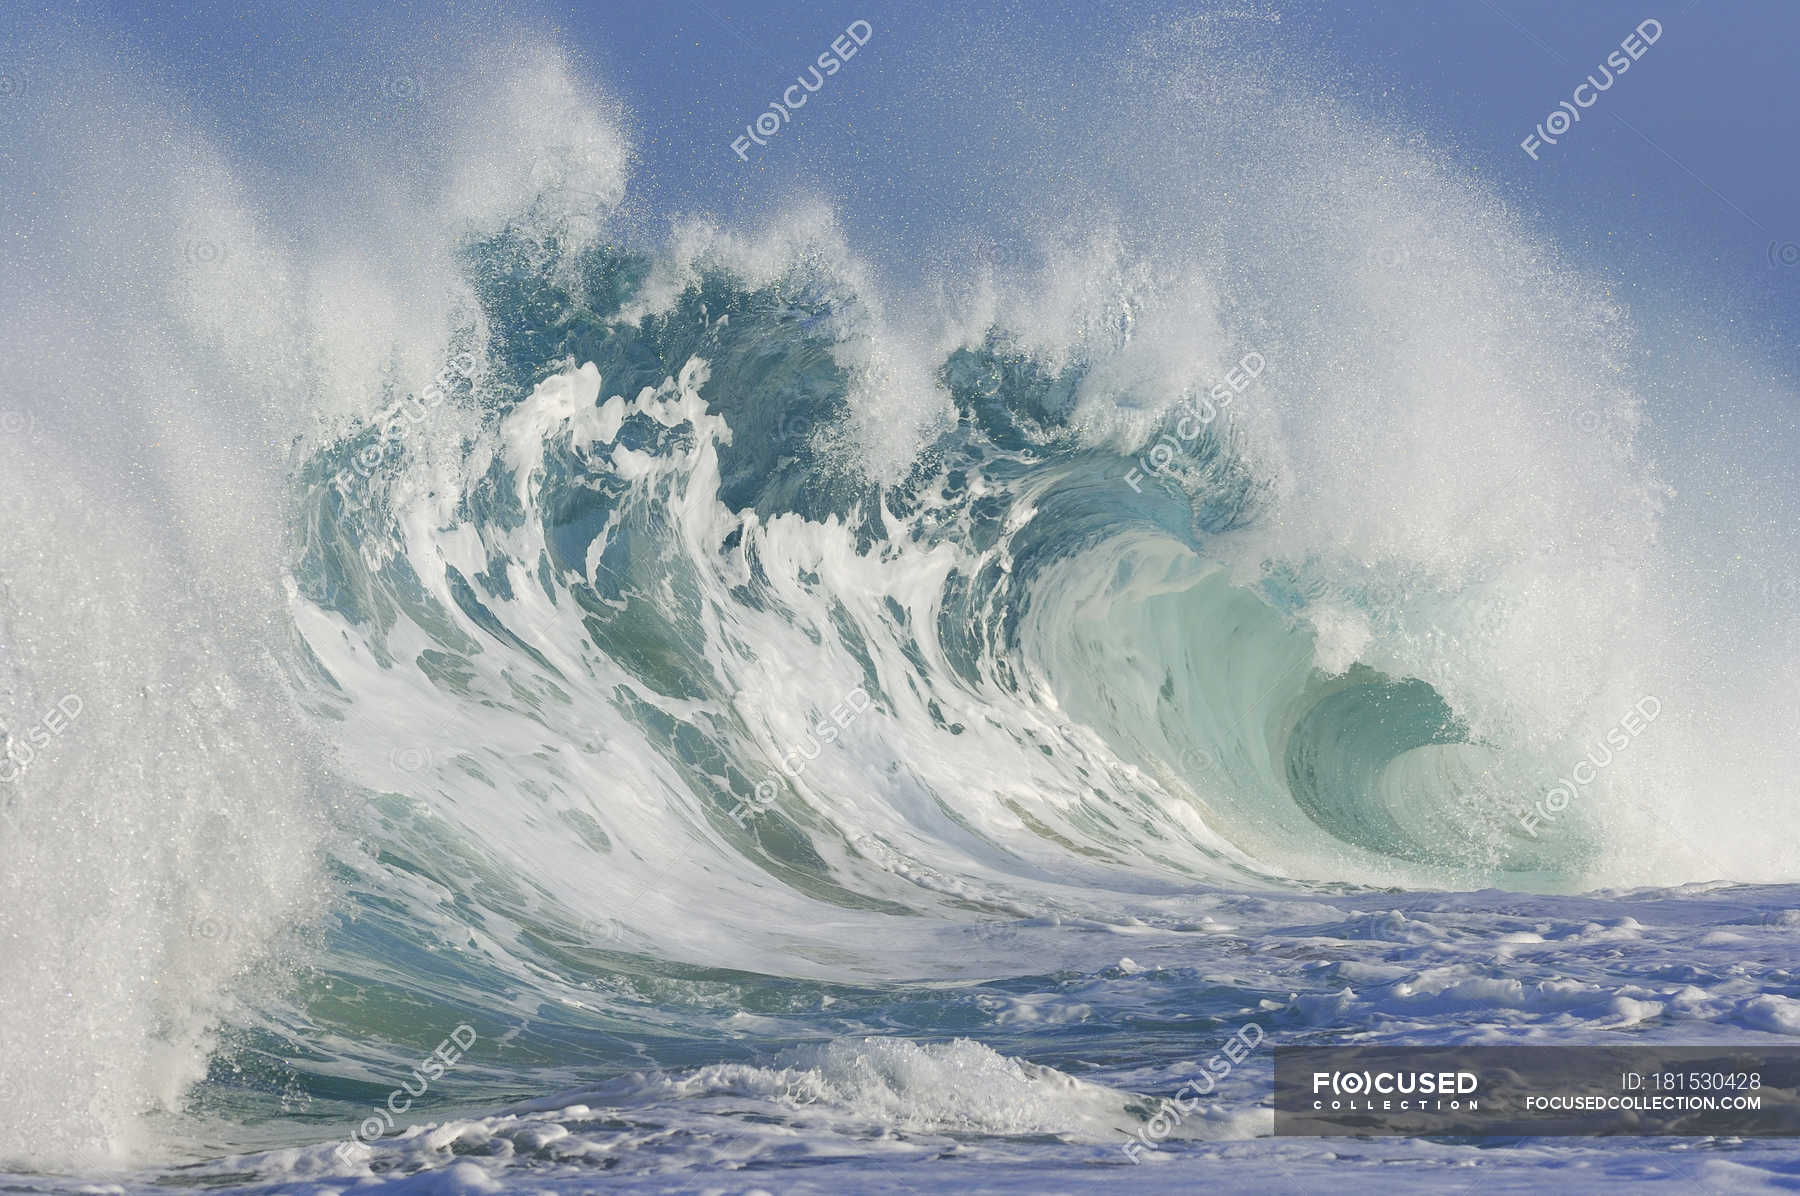 Ocean wave rip curl view in bright sunlight — Stock Photo | #181530428